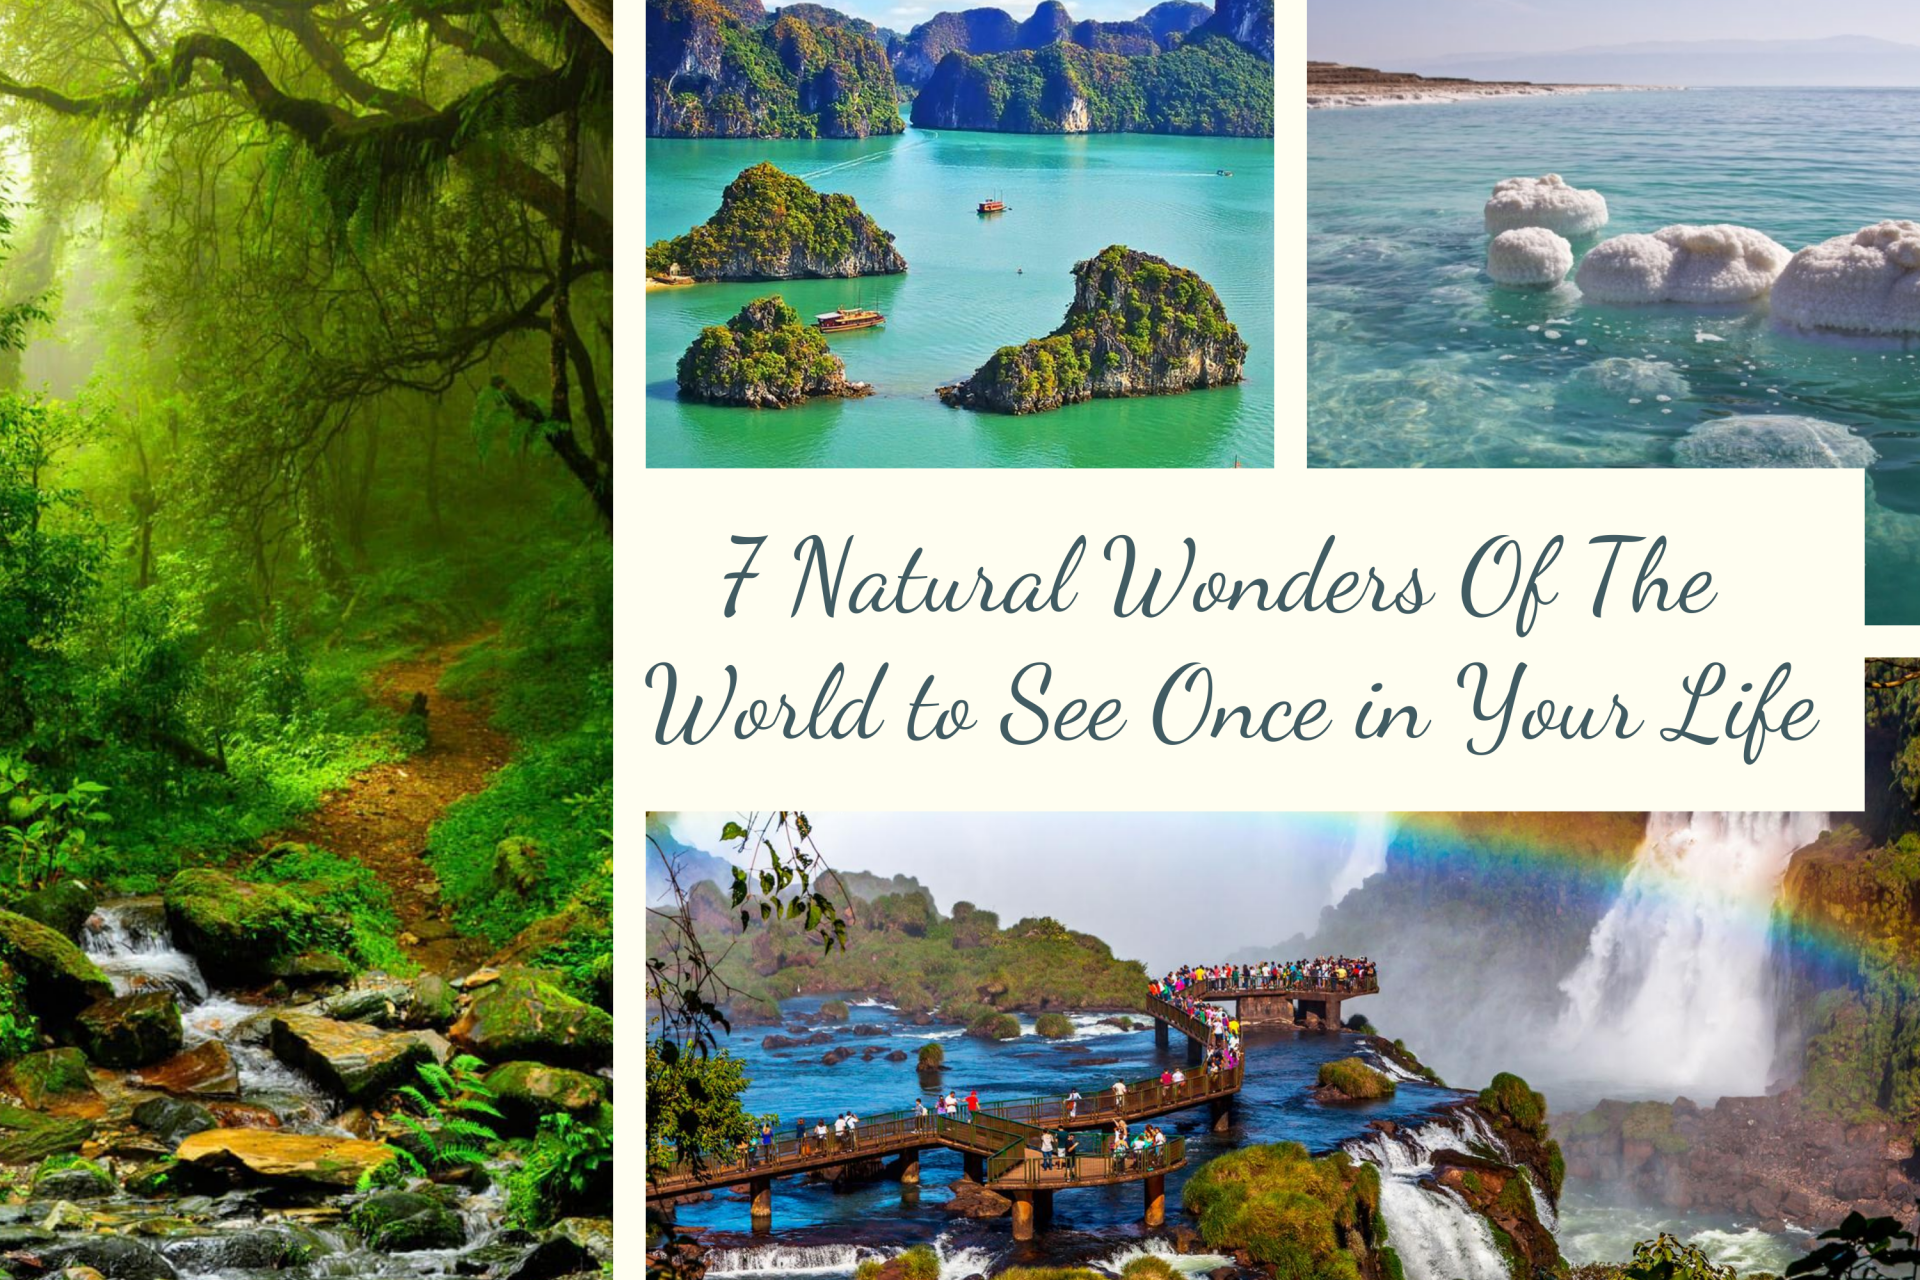 7 Breathtaking Natural Wonders Of The World to See Once in Your Life